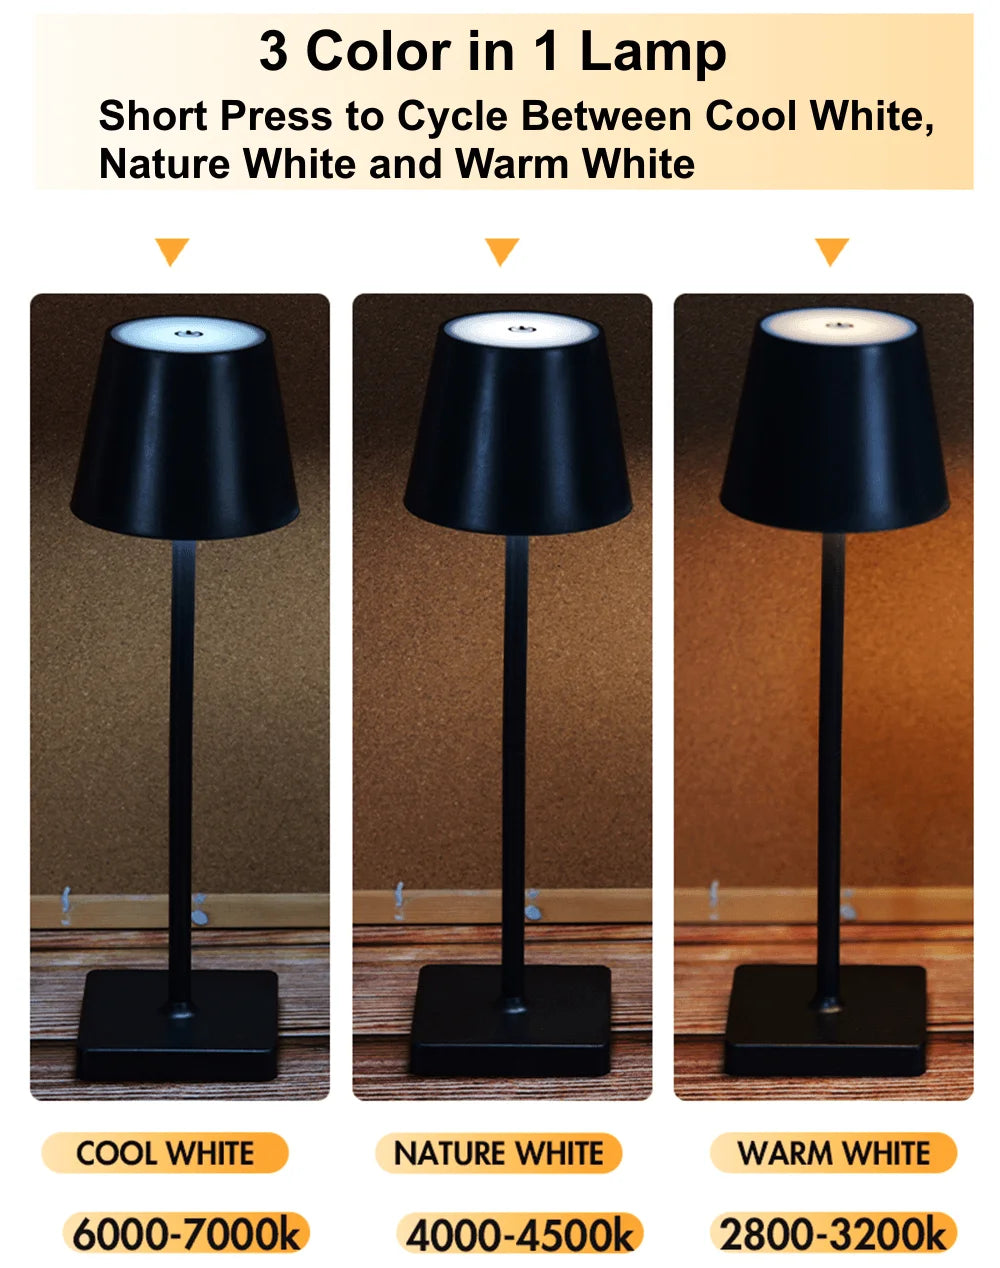 USB Rechargeable Mushroom LED Night Light - 3 Color Touch Switch Desk Lamp for Restaurant, Clubs, Bar